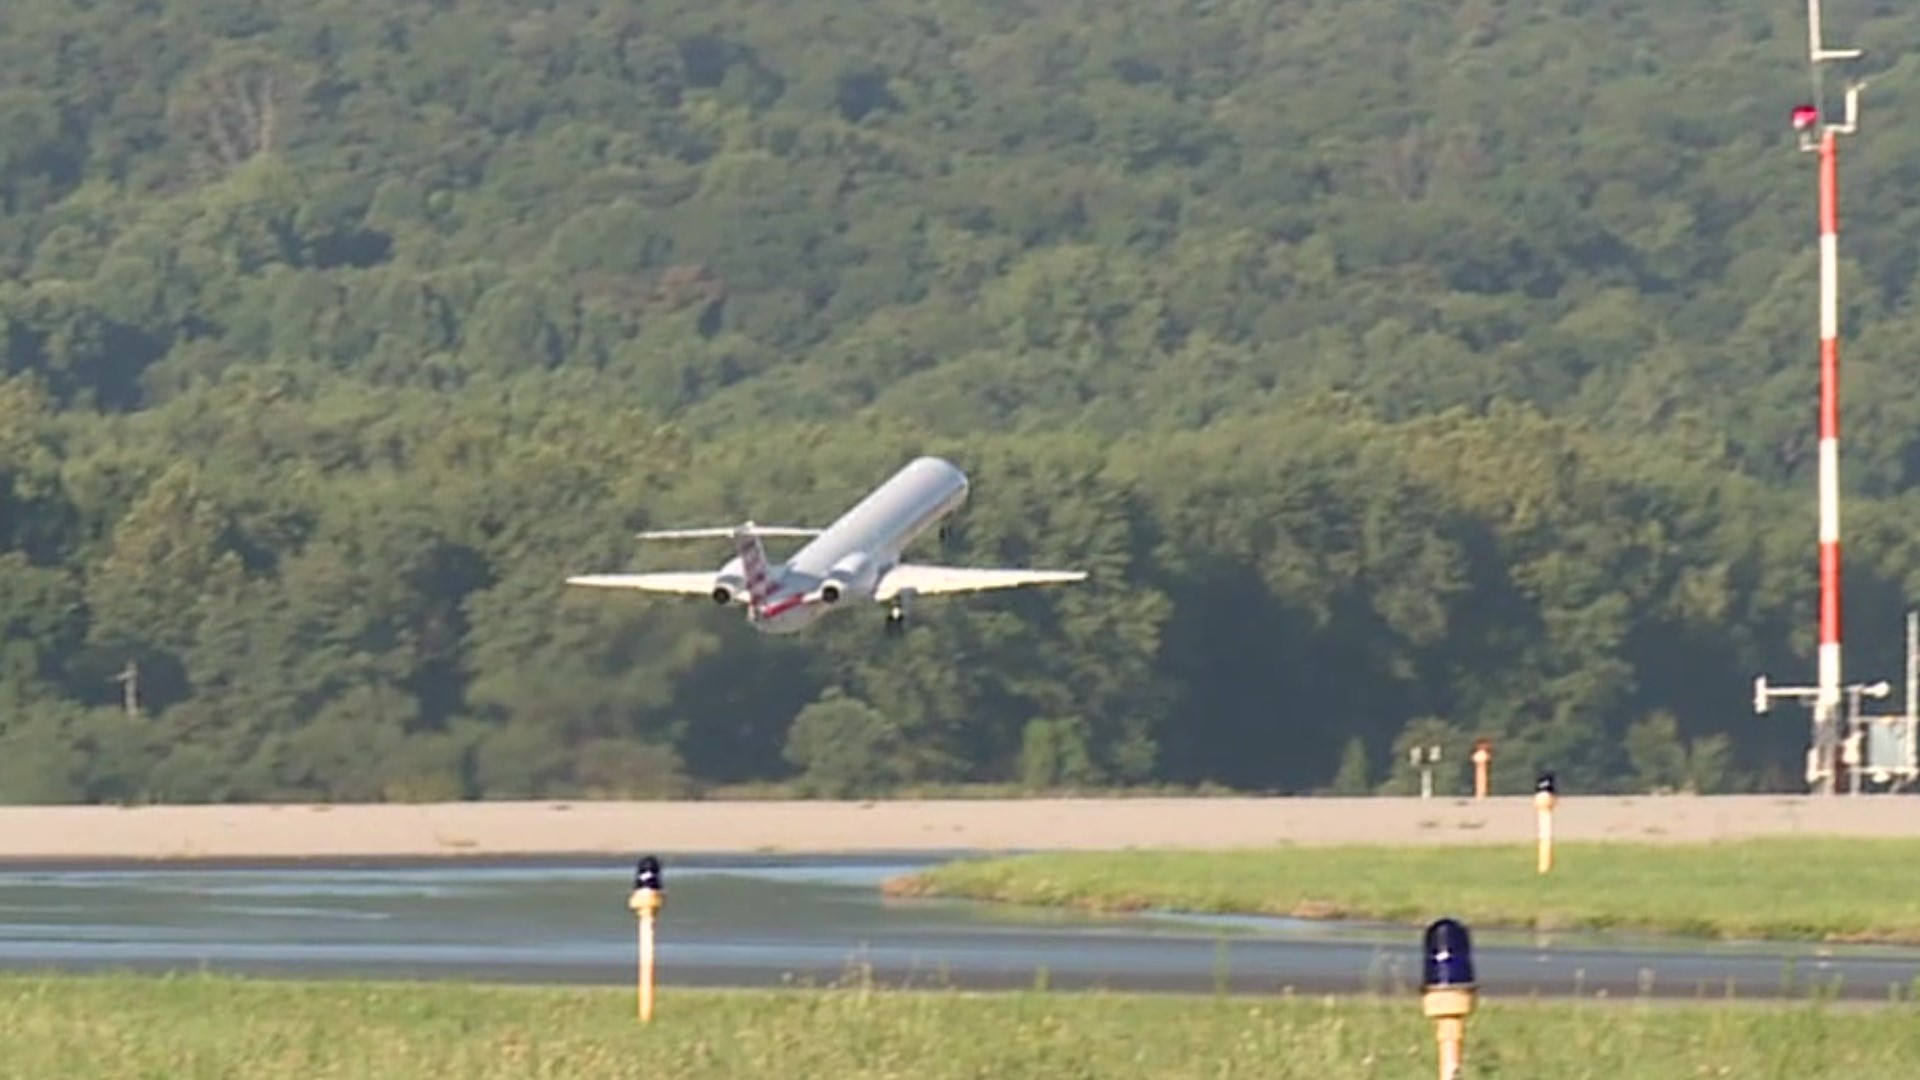 American Airlines will discontinue its service at the Williamsport Regional Airport on September 30.